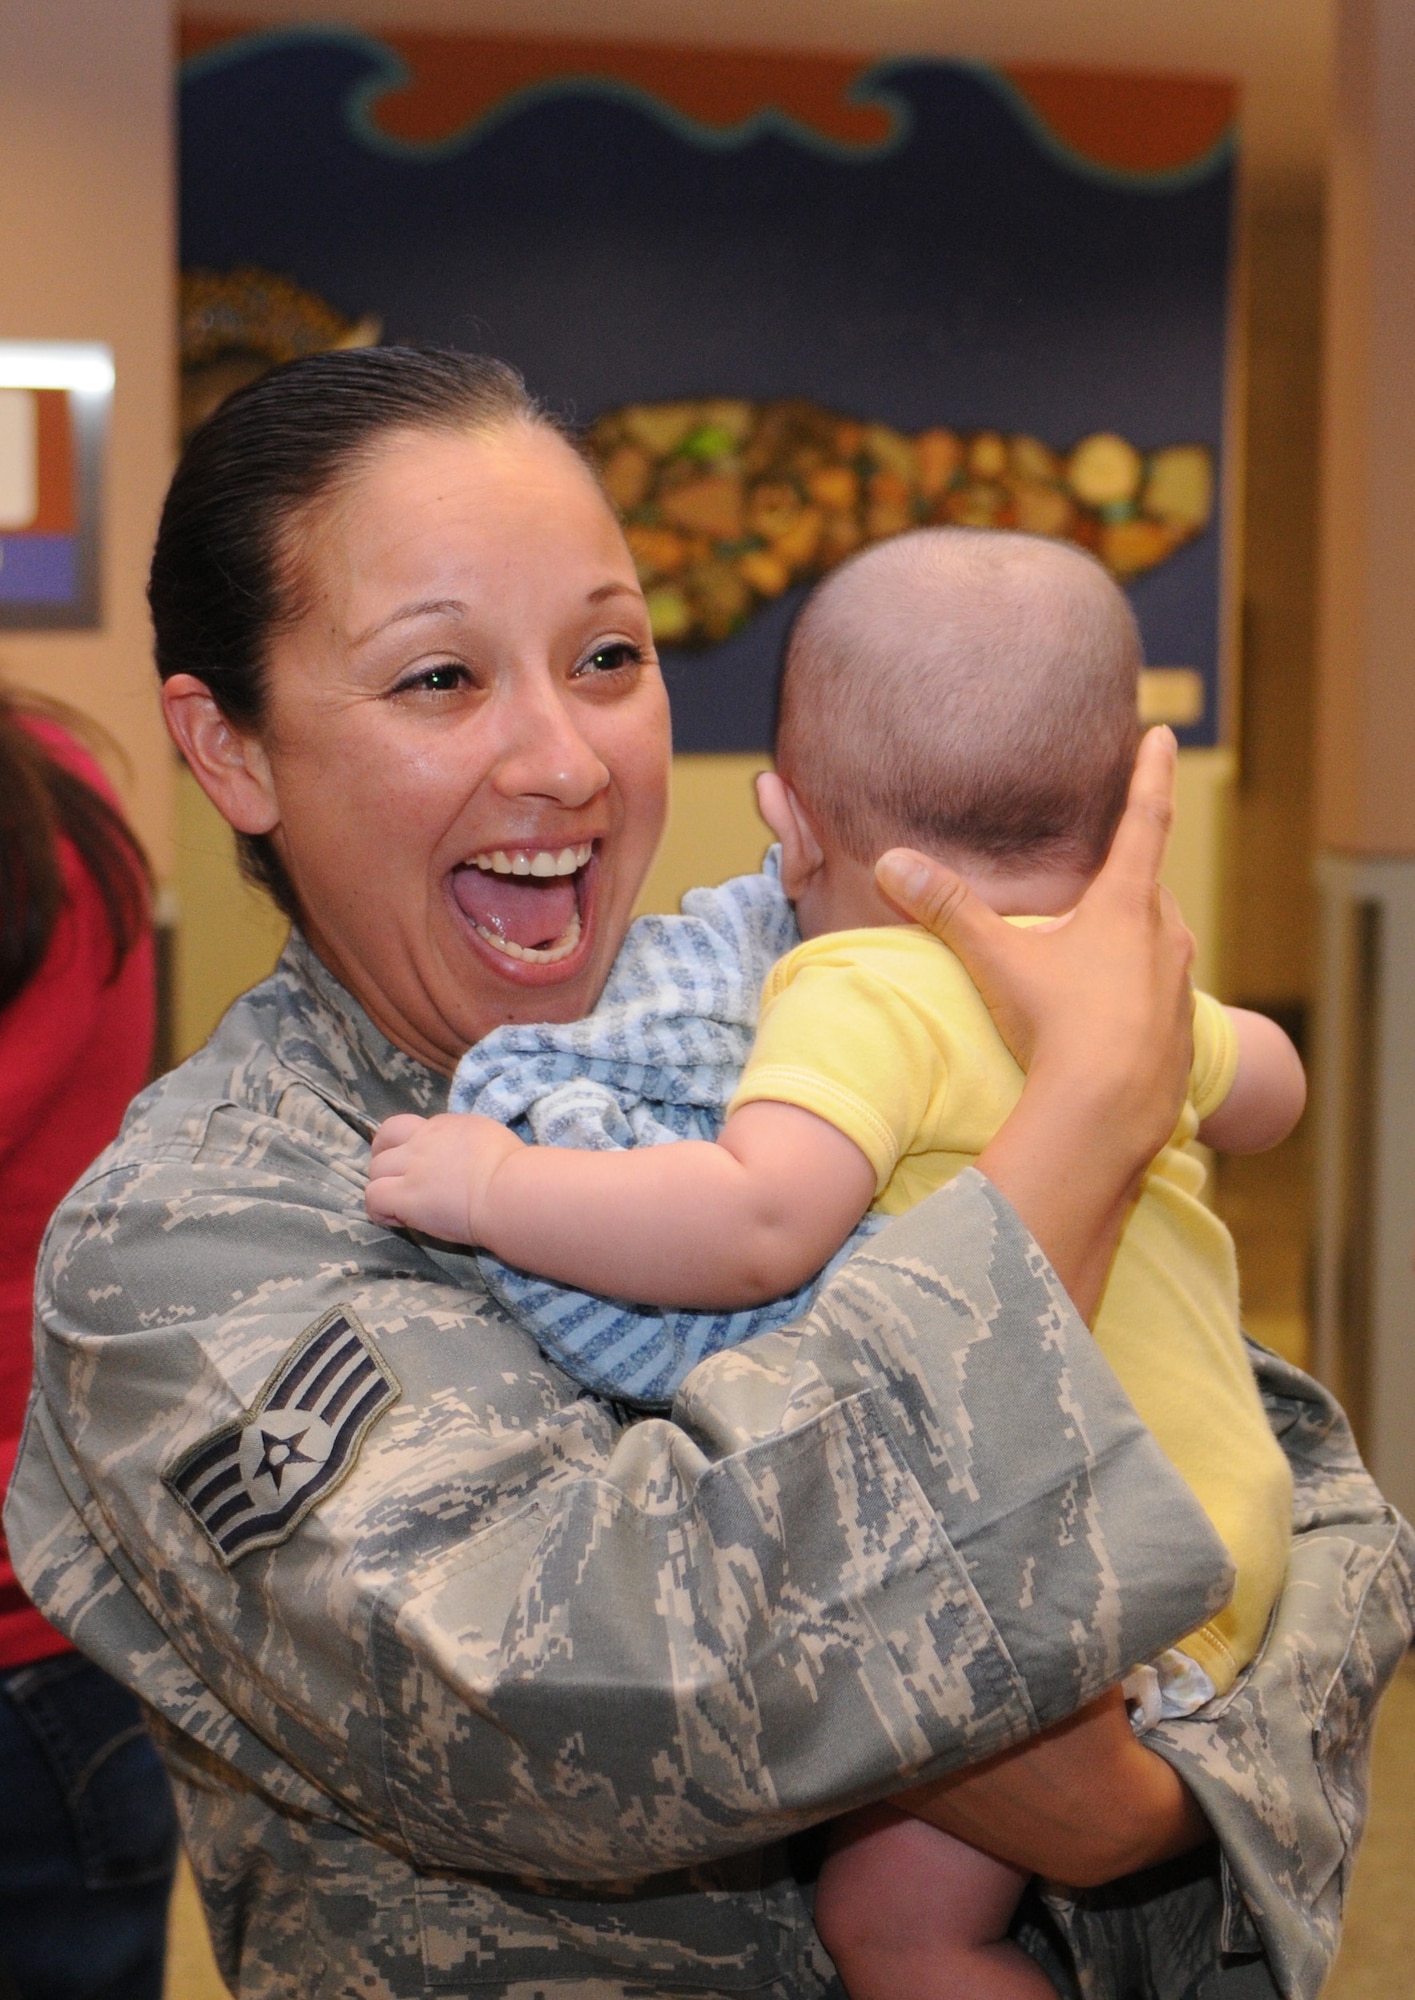 Staff Sgt. Melissa Ballesteros is welcomed home after a five-month deployment to Iraq, June 6. Family and friends celebrated the return of 29 security forces Airmen assigned to the 162nd Fighter Wing at Tucson International Airport. (Air Force photo by Maj. Gabe Johnson)